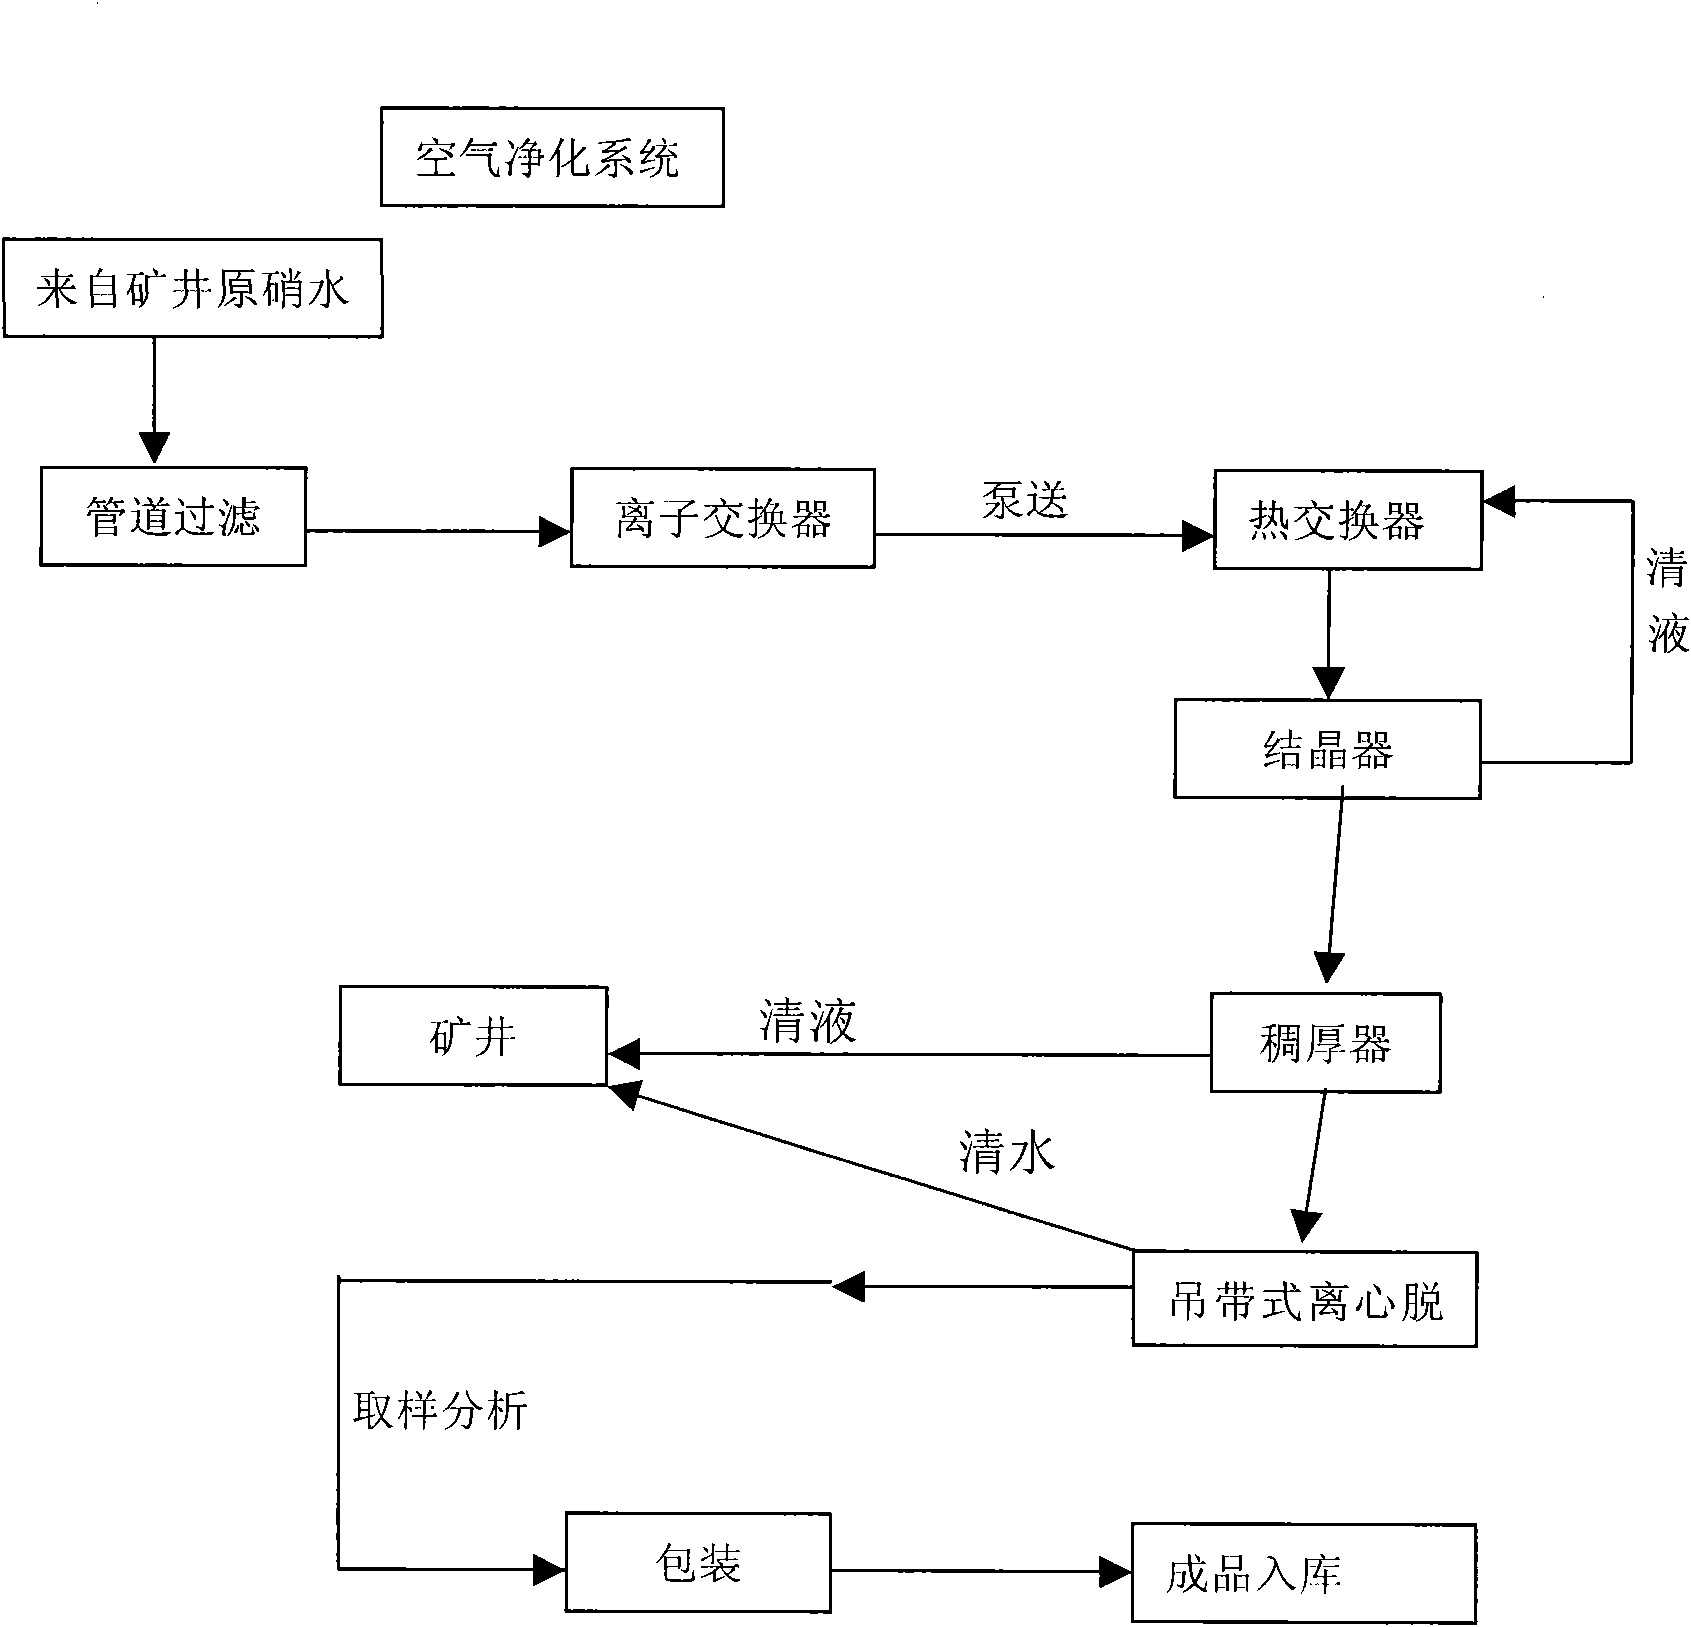 Technique for producing medicinal mirabilite by continuous crystallization